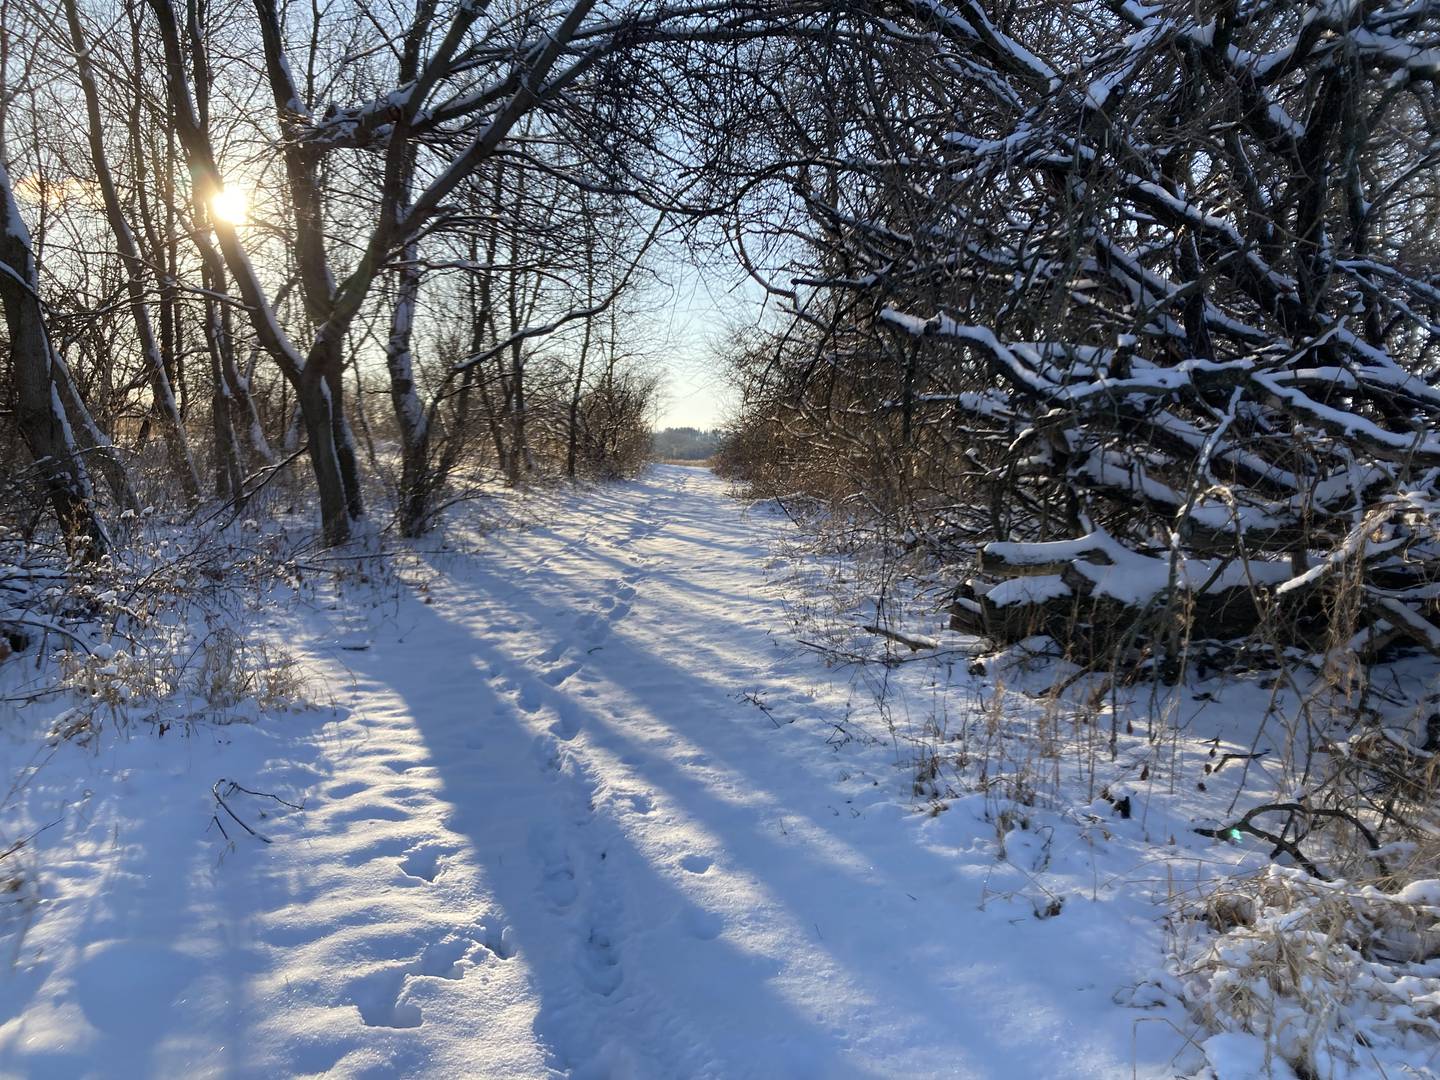 The Land Conservancy of McHenry County acquired 300 acres of land near Bull Valley in March 2022. The nonprofit plans to turn the land into a nature park, while preserving its 5 miles of bridle trails.